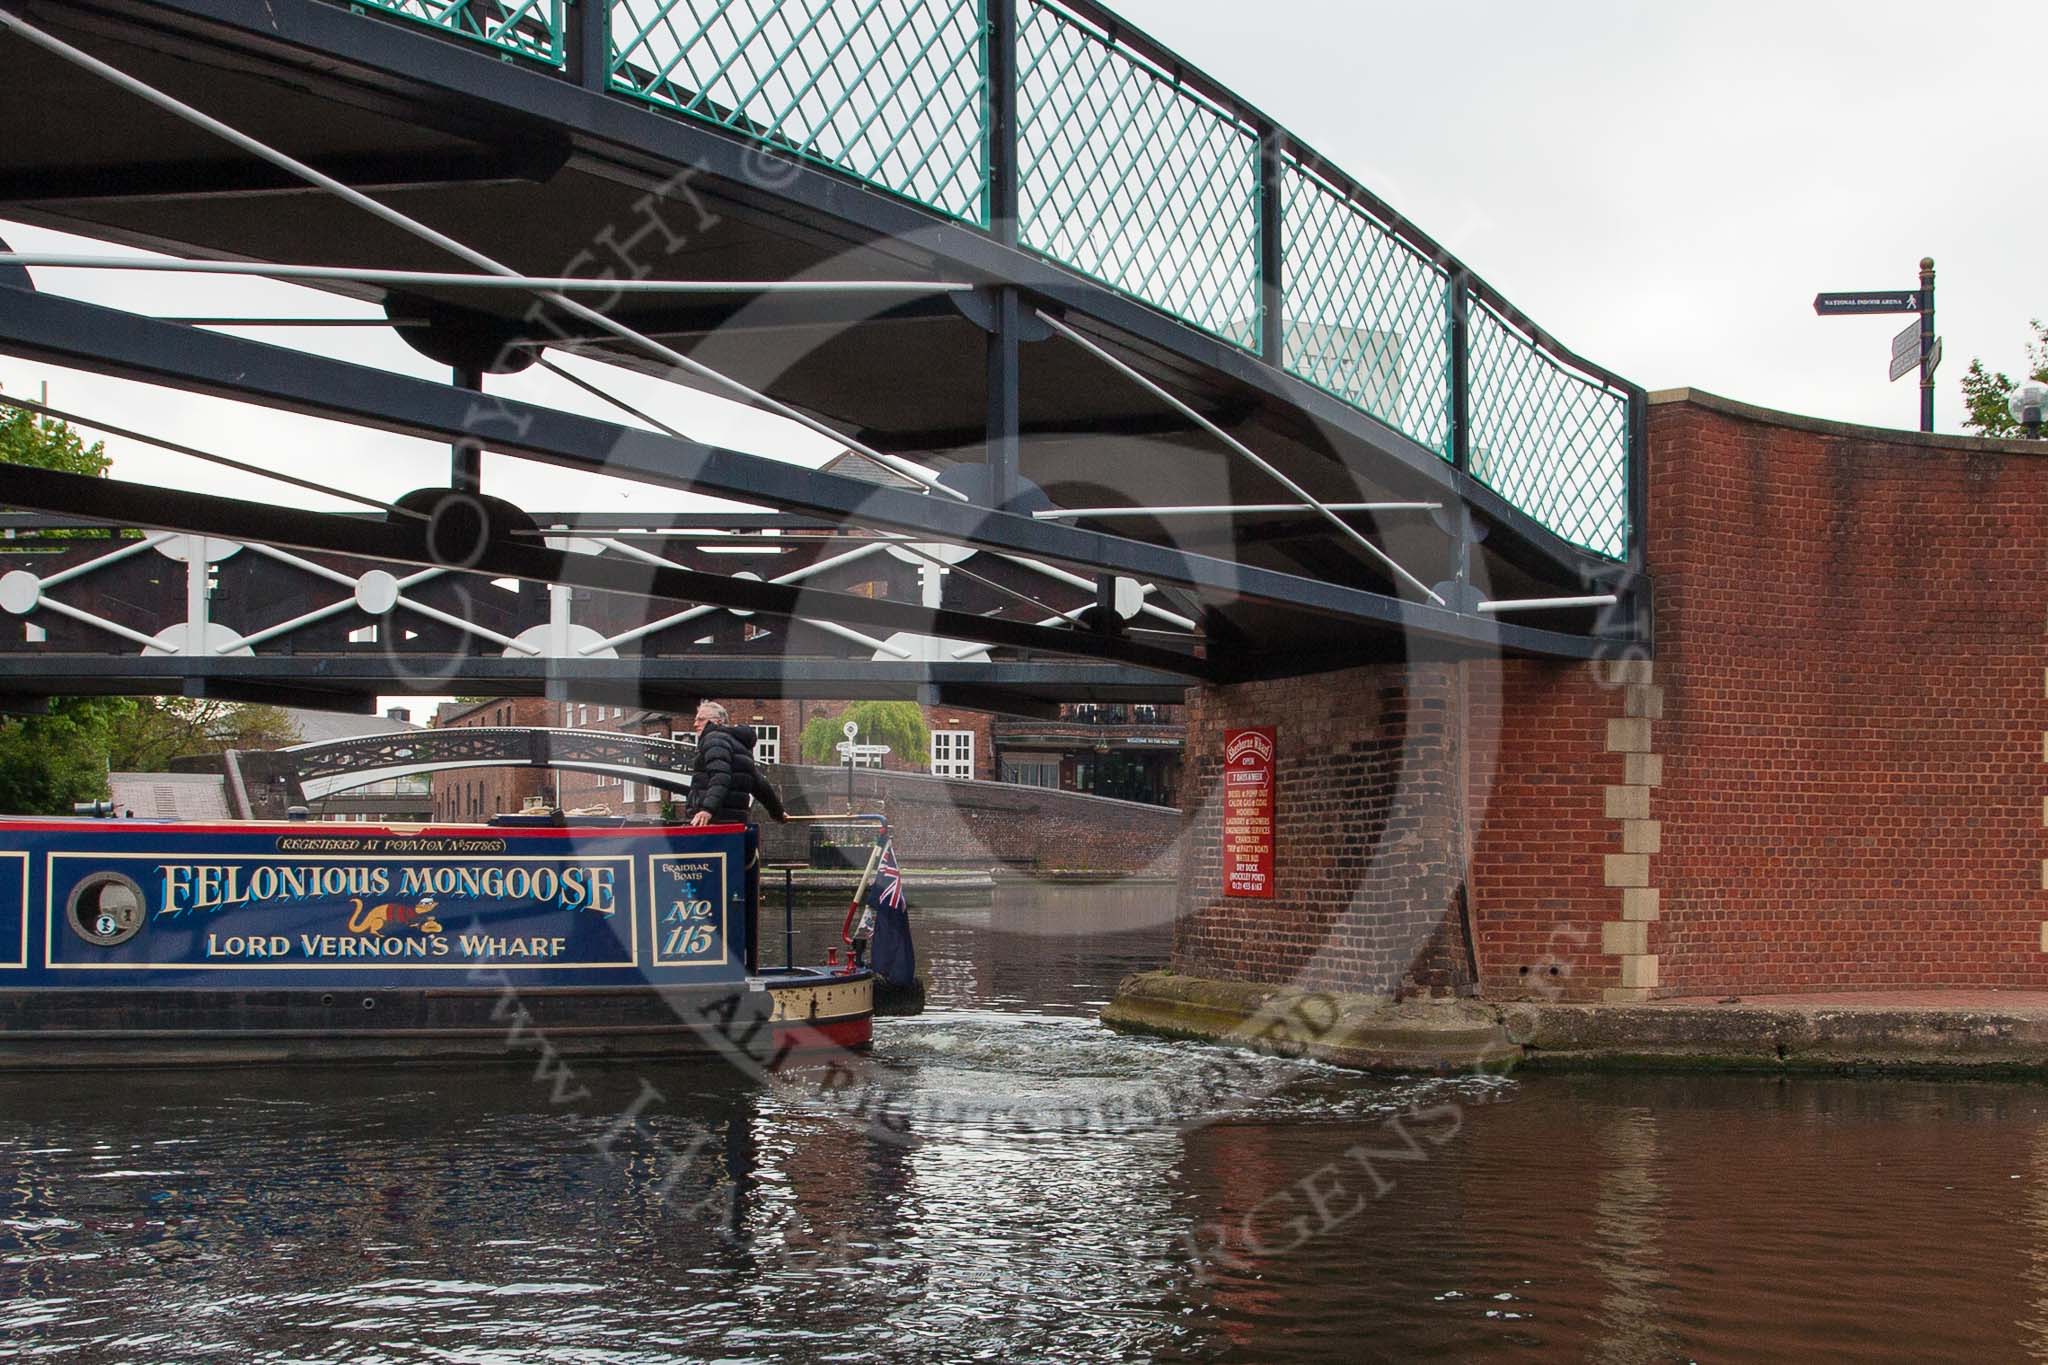 BCN Marathon Challenge 2013: NB "Felonious Mongoose" turning from Oozells Street Loop into the BCN Main Line at Old Turn Junction, five minutes before the start of the BC Marathon Challenge..
Birmingham Canal Navigation,


United Kingdom,
on 25 May 2013 at 07:44, image #21